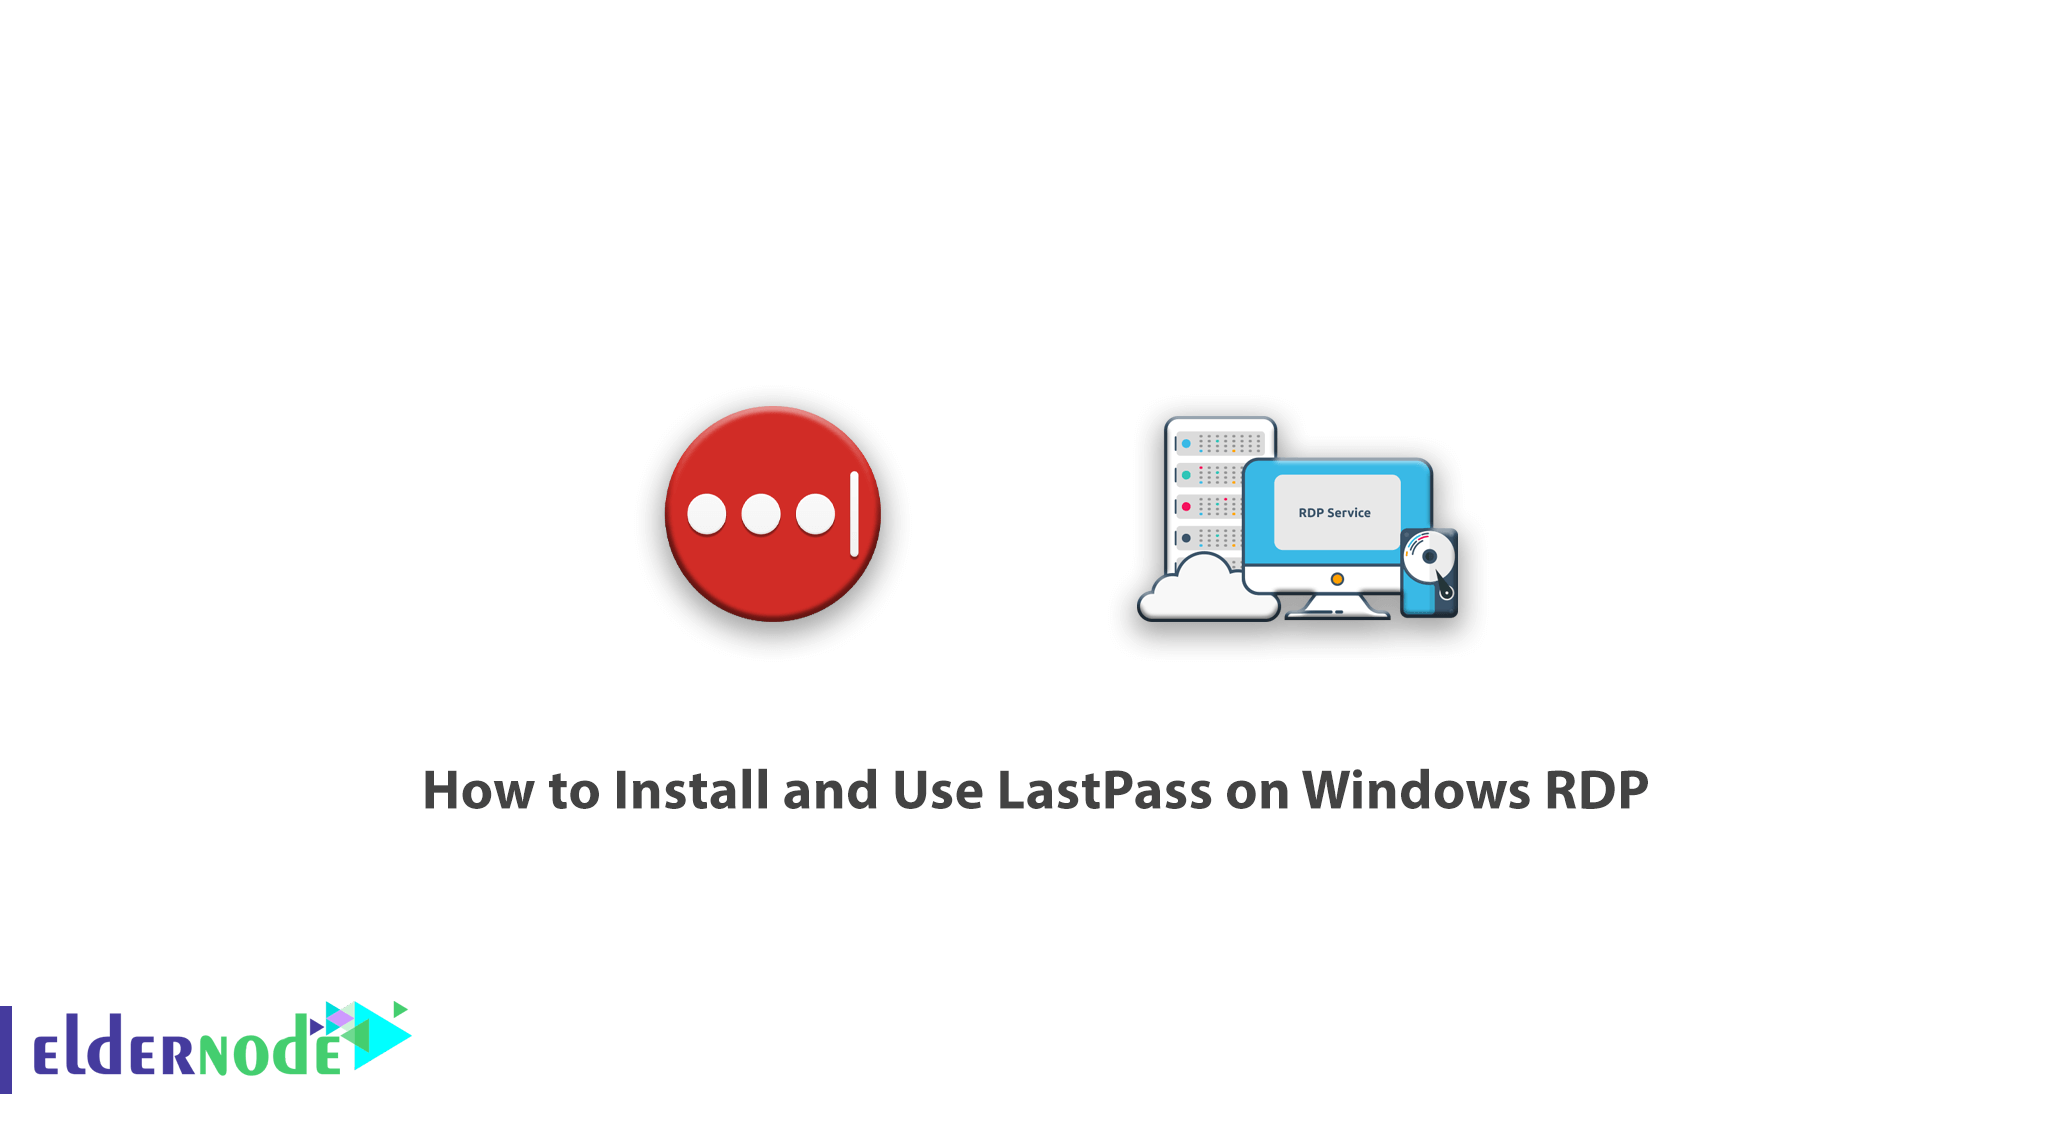 How to Install and Use LastPass on Windows RDP